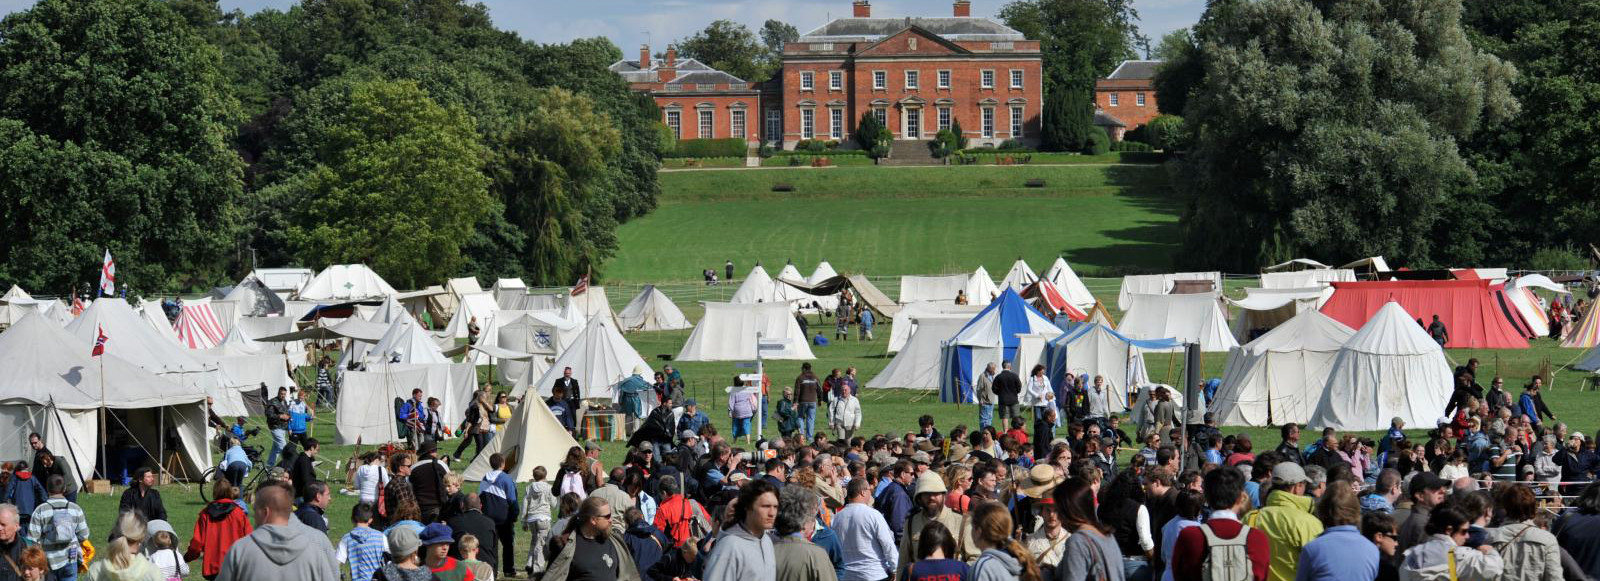 Crowd attending Festival of History with Kelmarsh Hall in the background